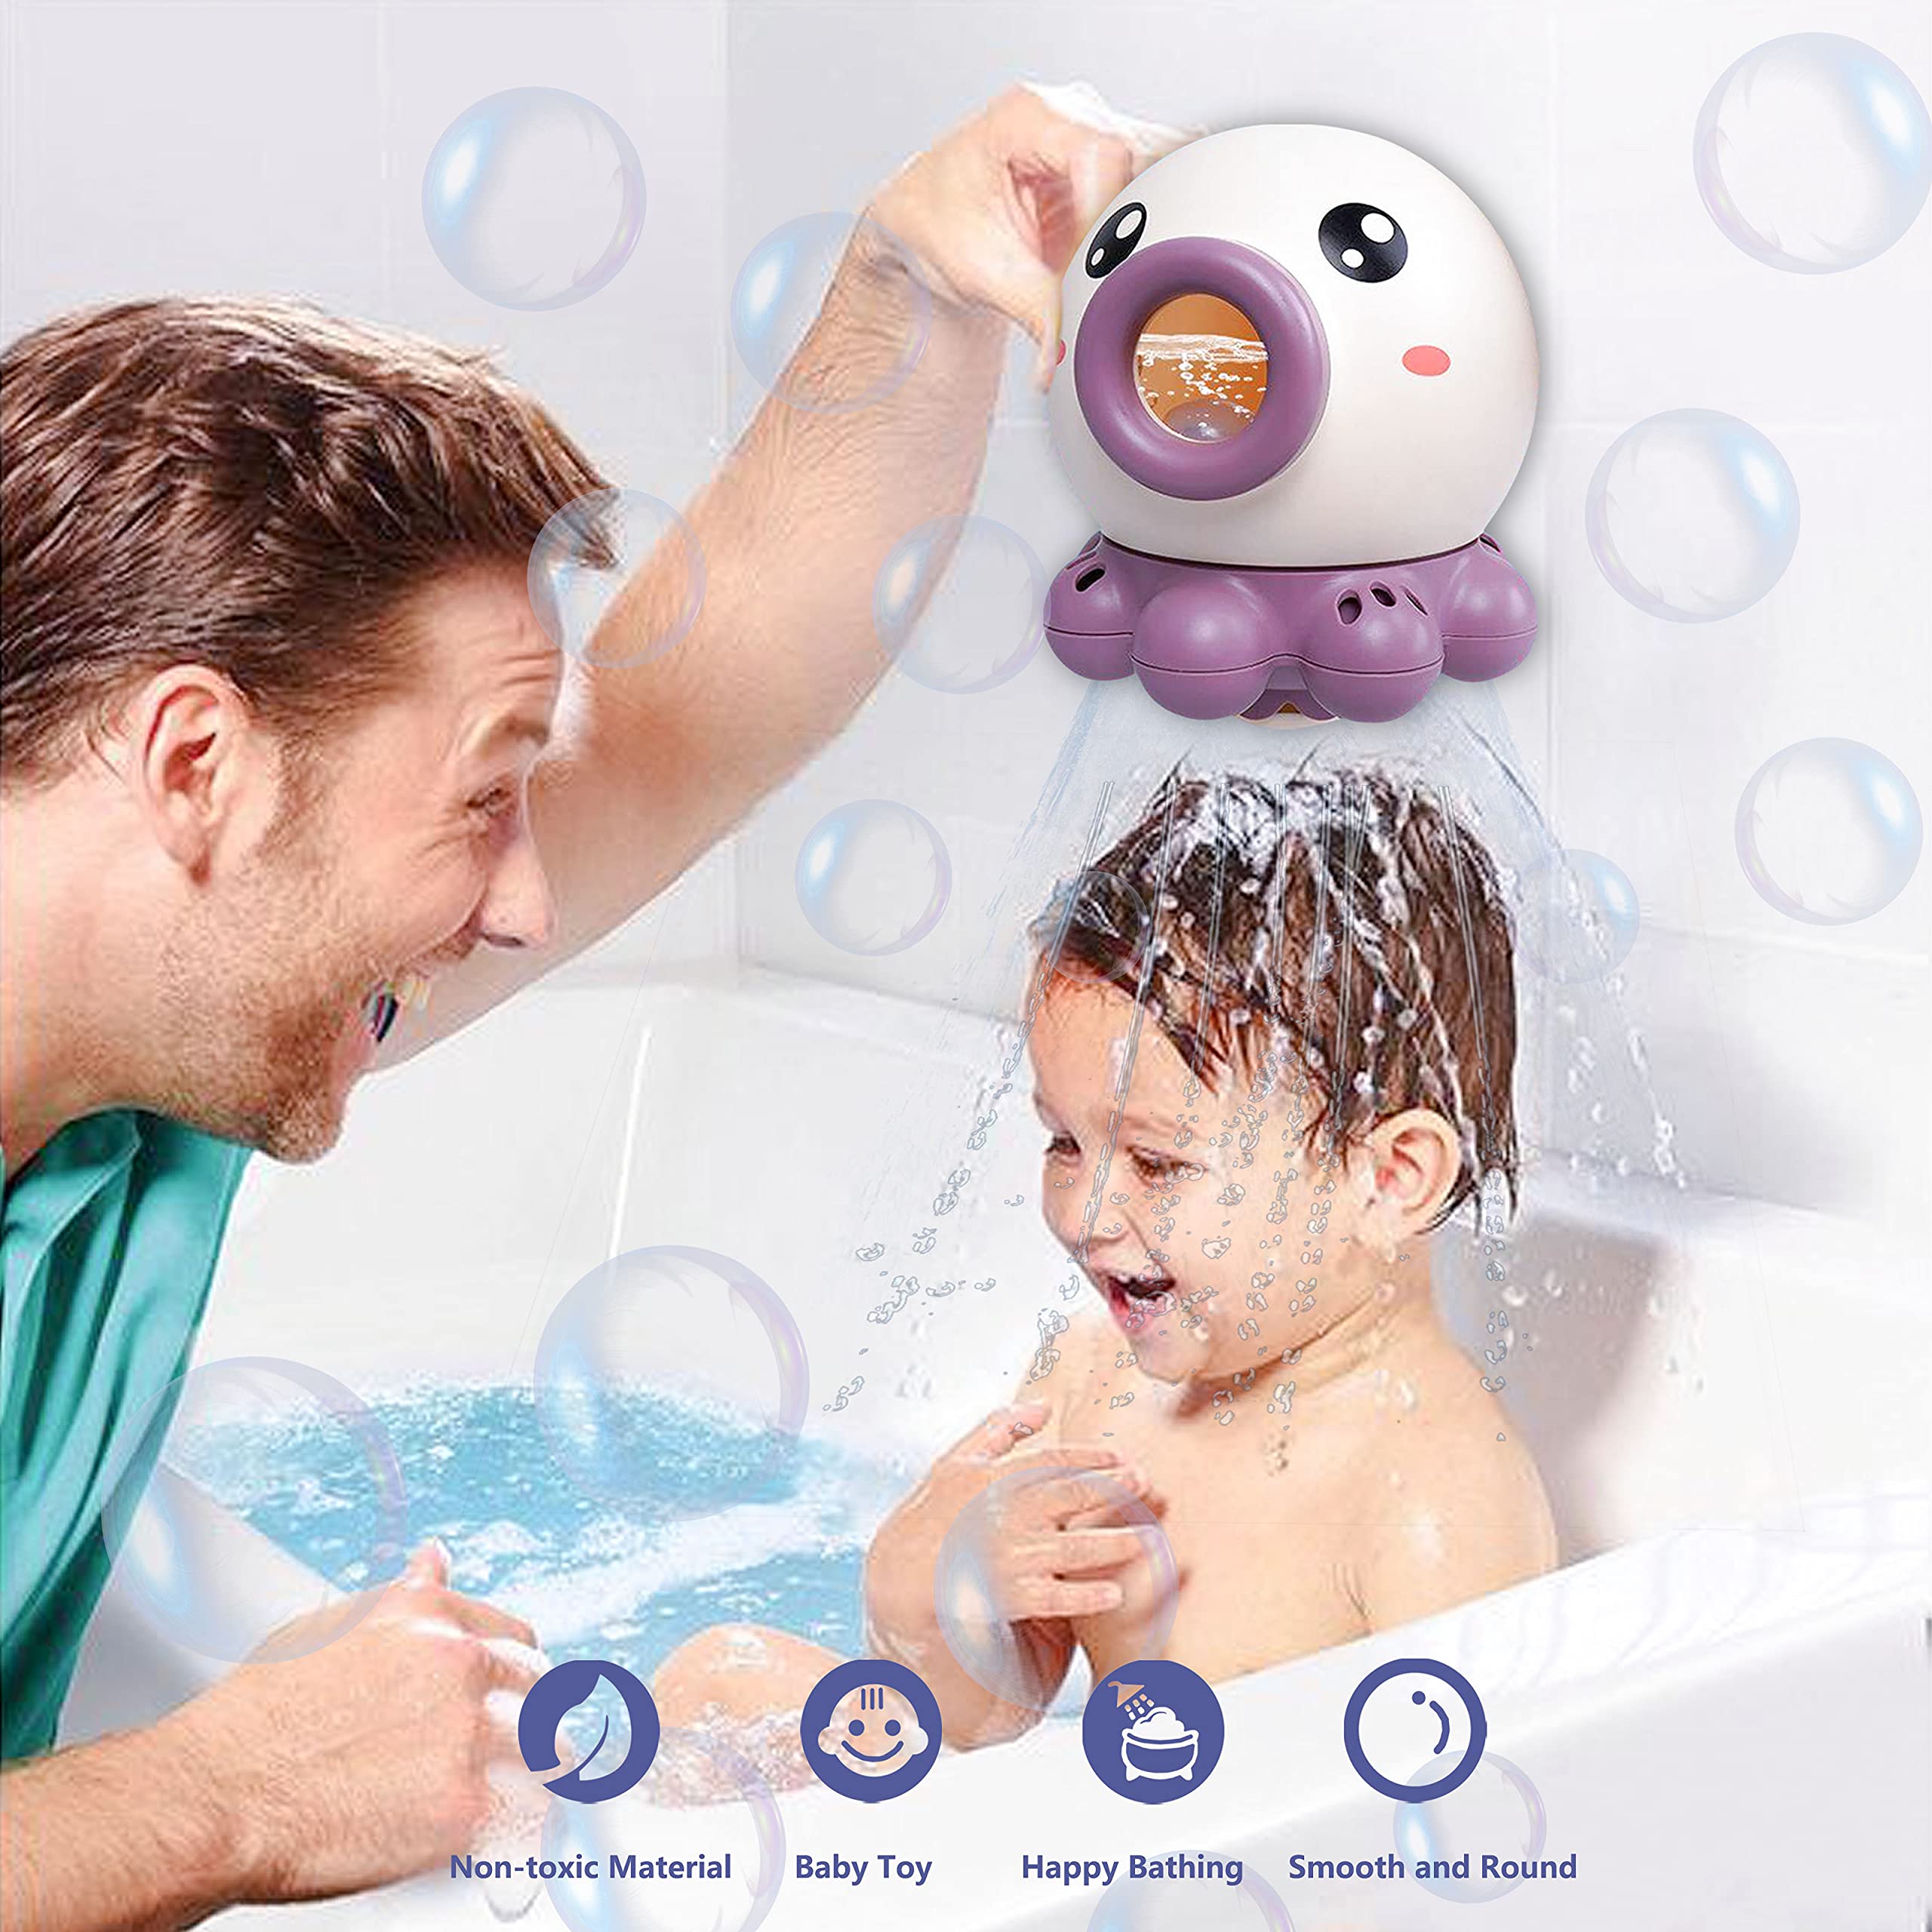 Octopus Fountain Bath Toy - Summer Water Fun for Kids 